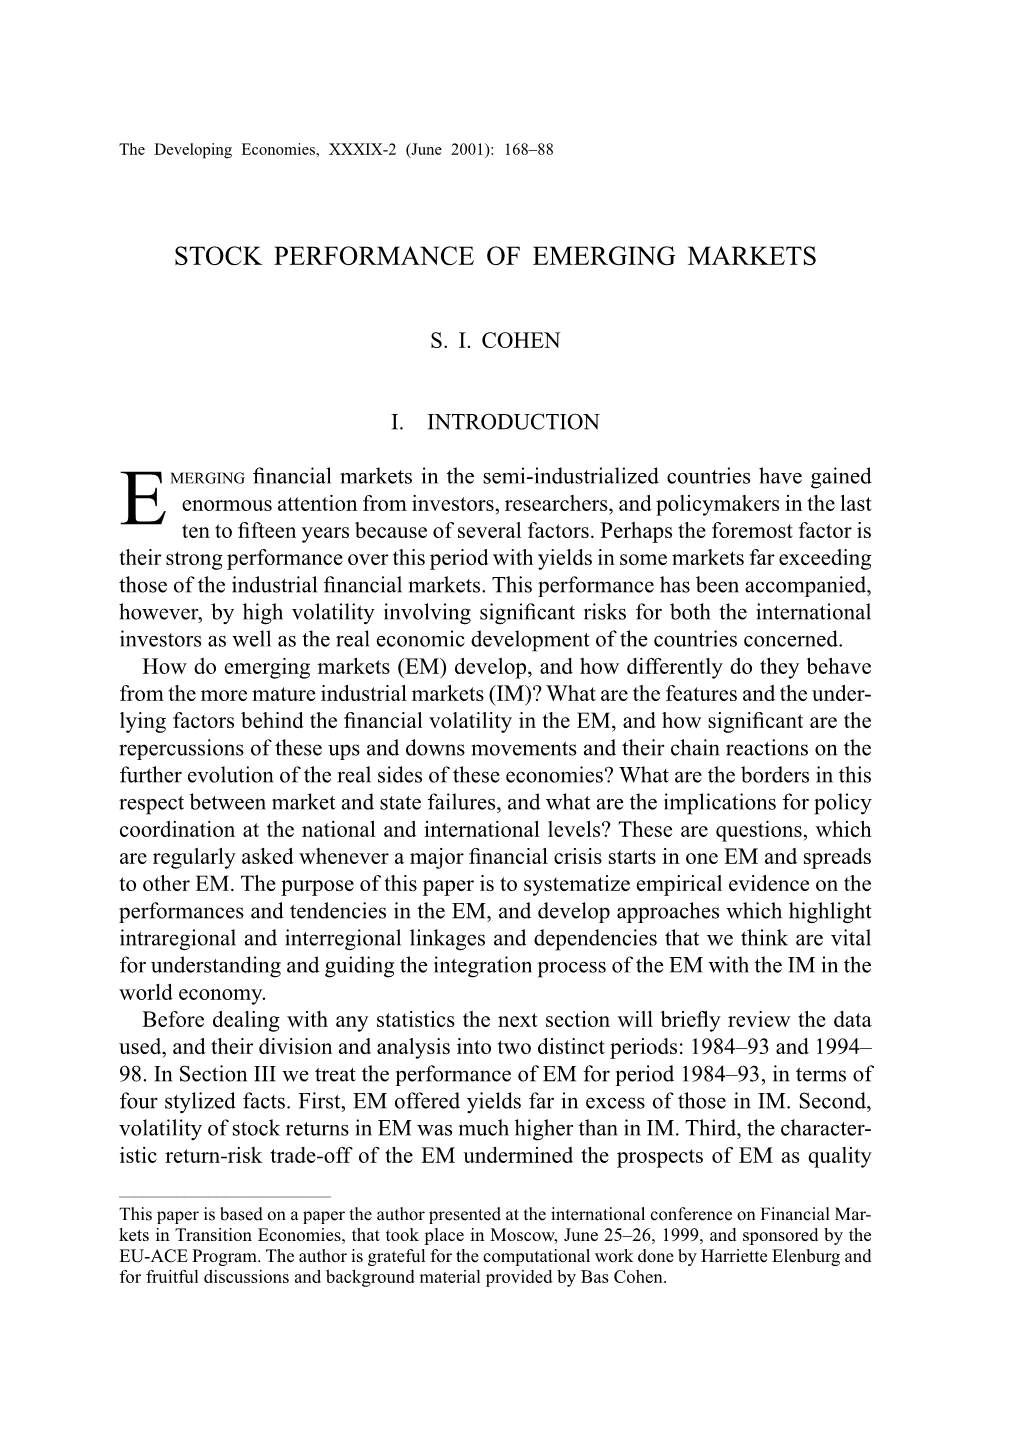 Stock Performance of Emerging Markets